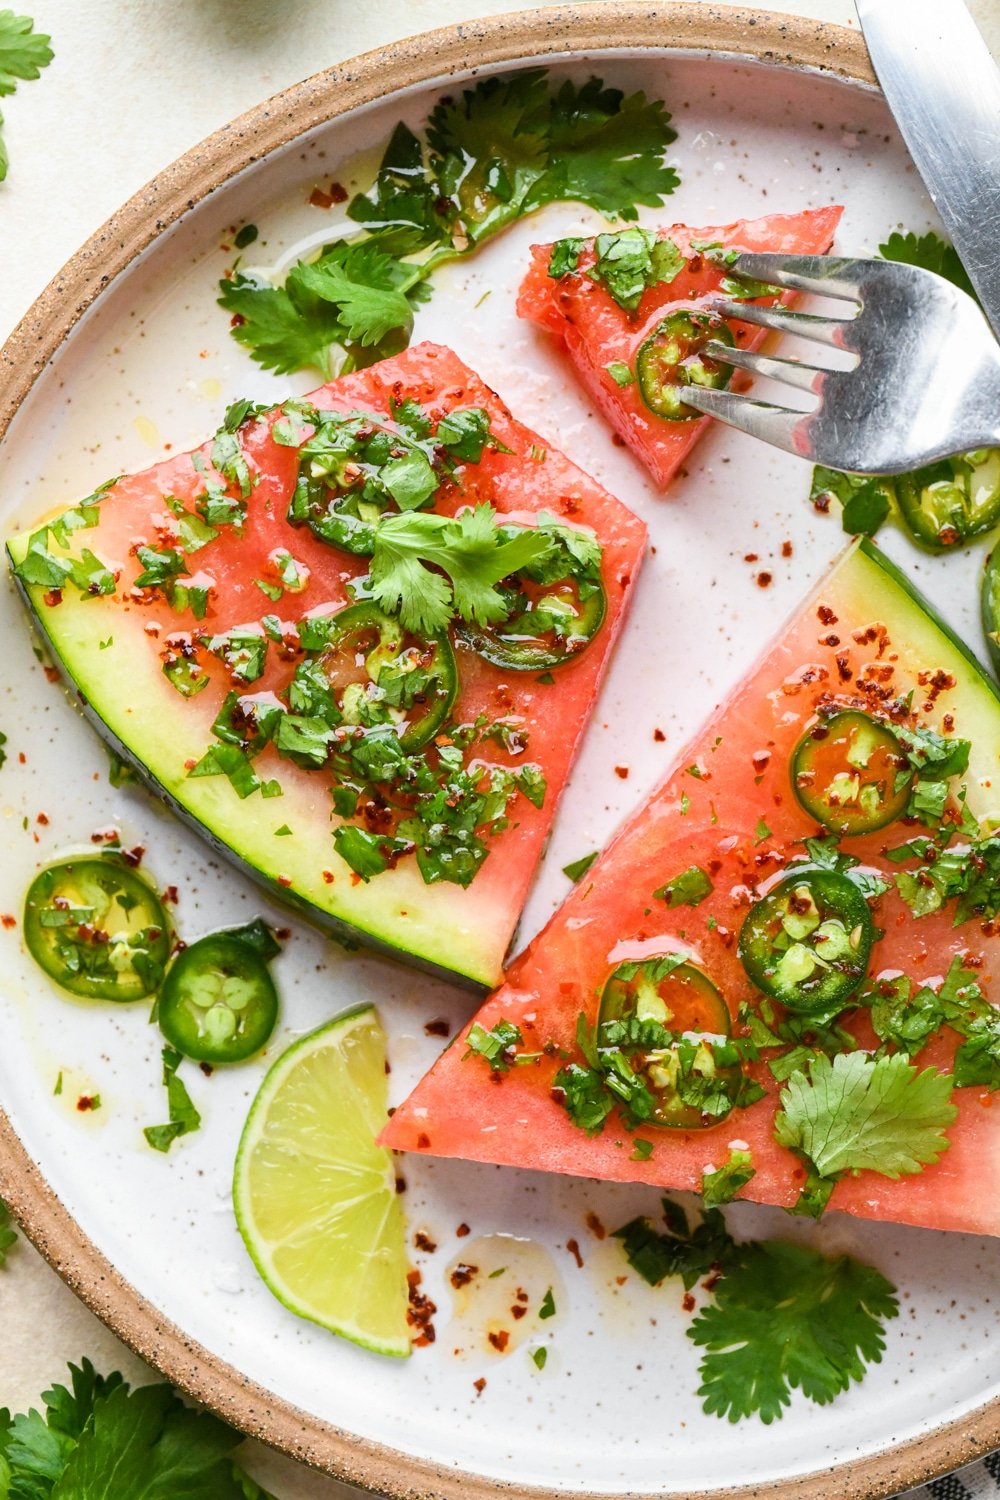 Spicy watermelon salad wedges on a ceramic plate topped with cilantro, jalapeño, lime dressing with a fork digging into a bite of the watermelon.